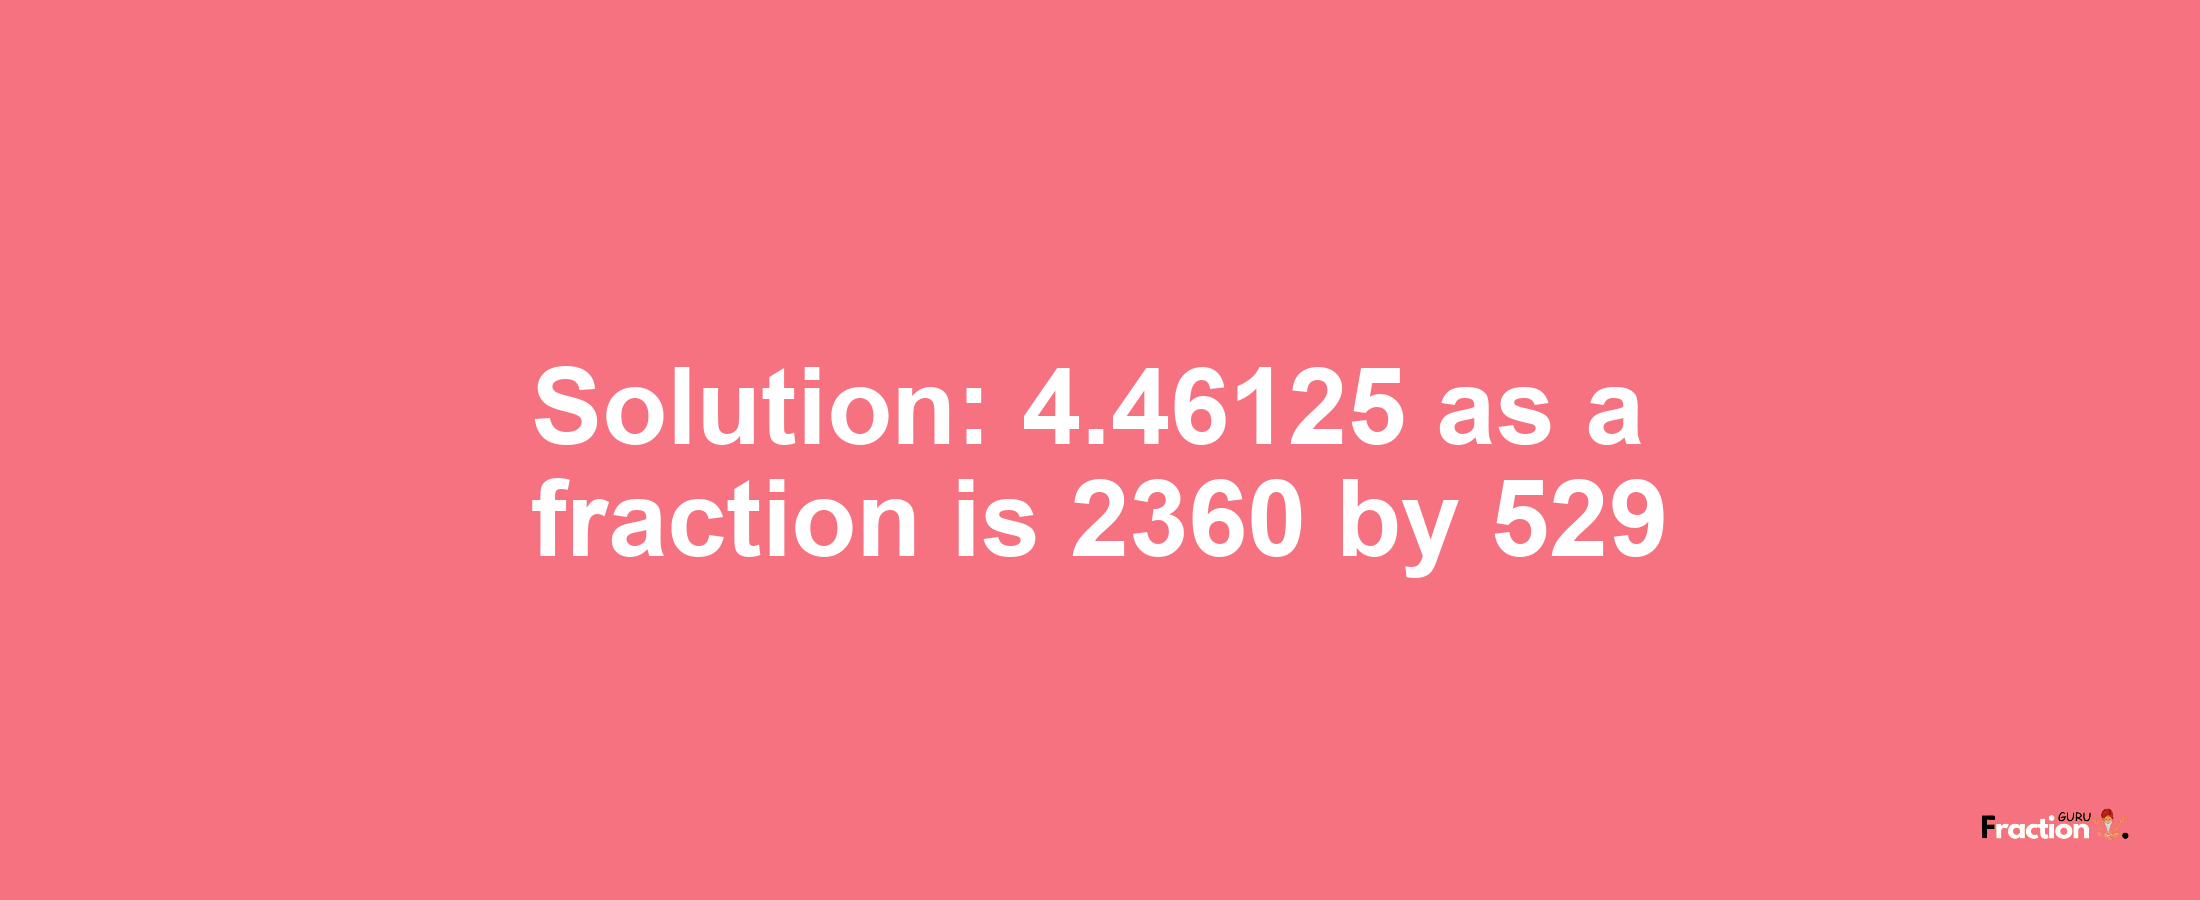 Solution:4.46125 as a fraction is 2360/529